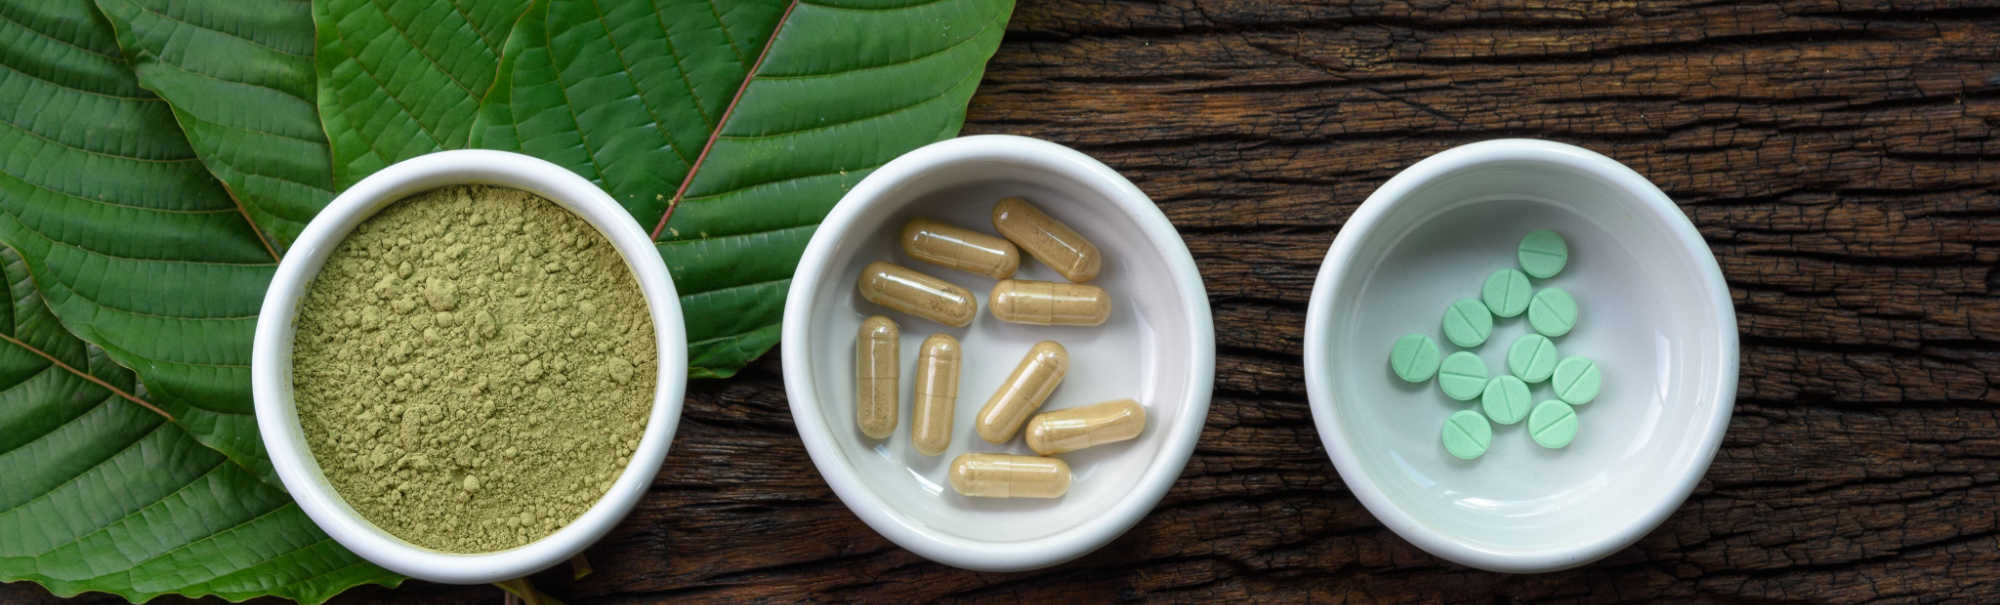 image of more about kratom